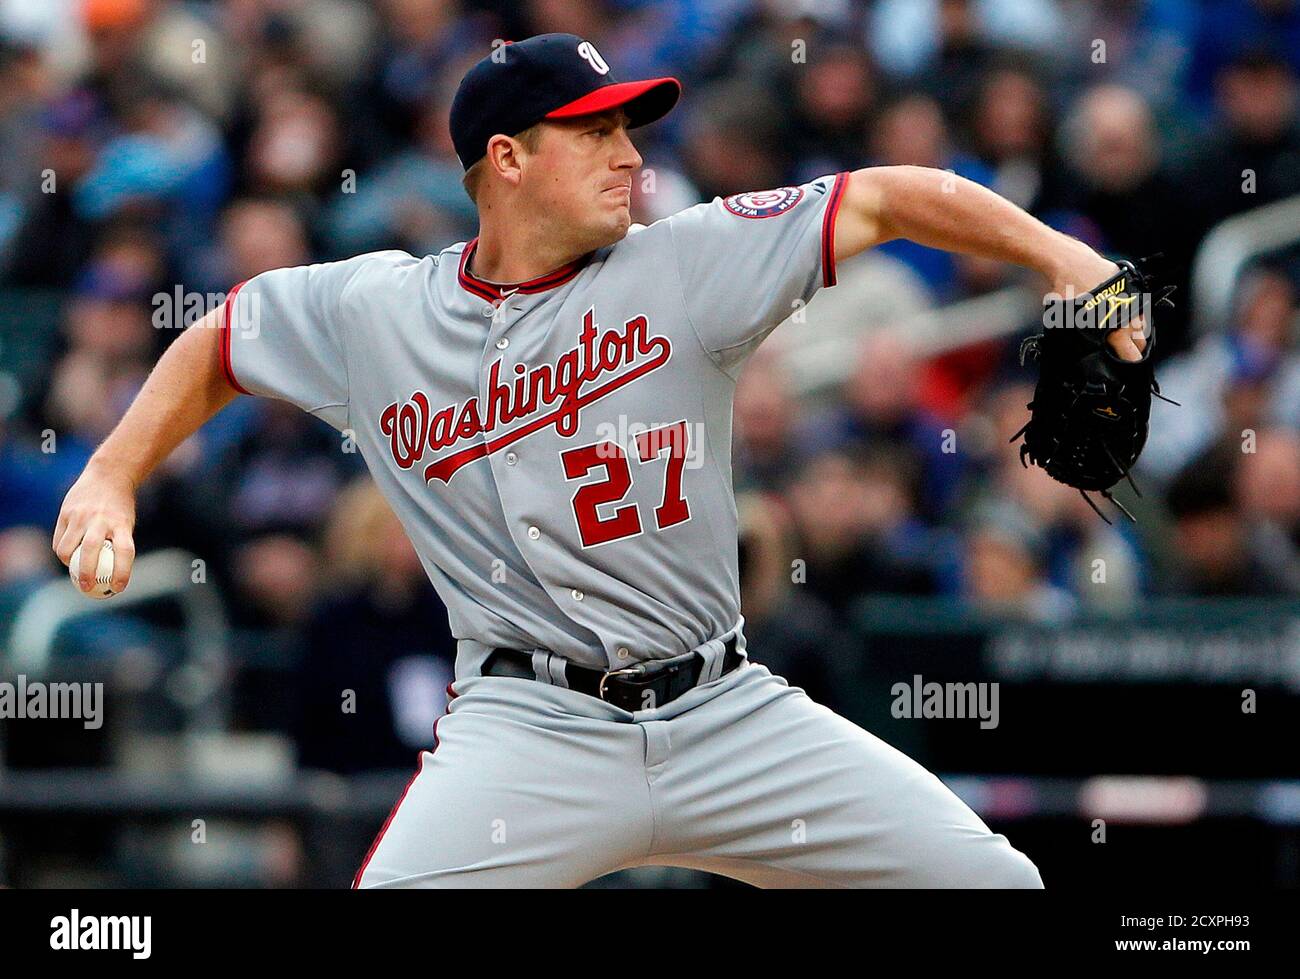 Washington Nationals starting pitcher Jordan Zimmermann throws during the first inning of their MLB National League baseball game against the New York Mets at Citi Field in New York April 8, 2011.  REUTERS/Jessica Rinaldi (UNITED STATES - Tags: SPORT BASEBALL) Stock Photo